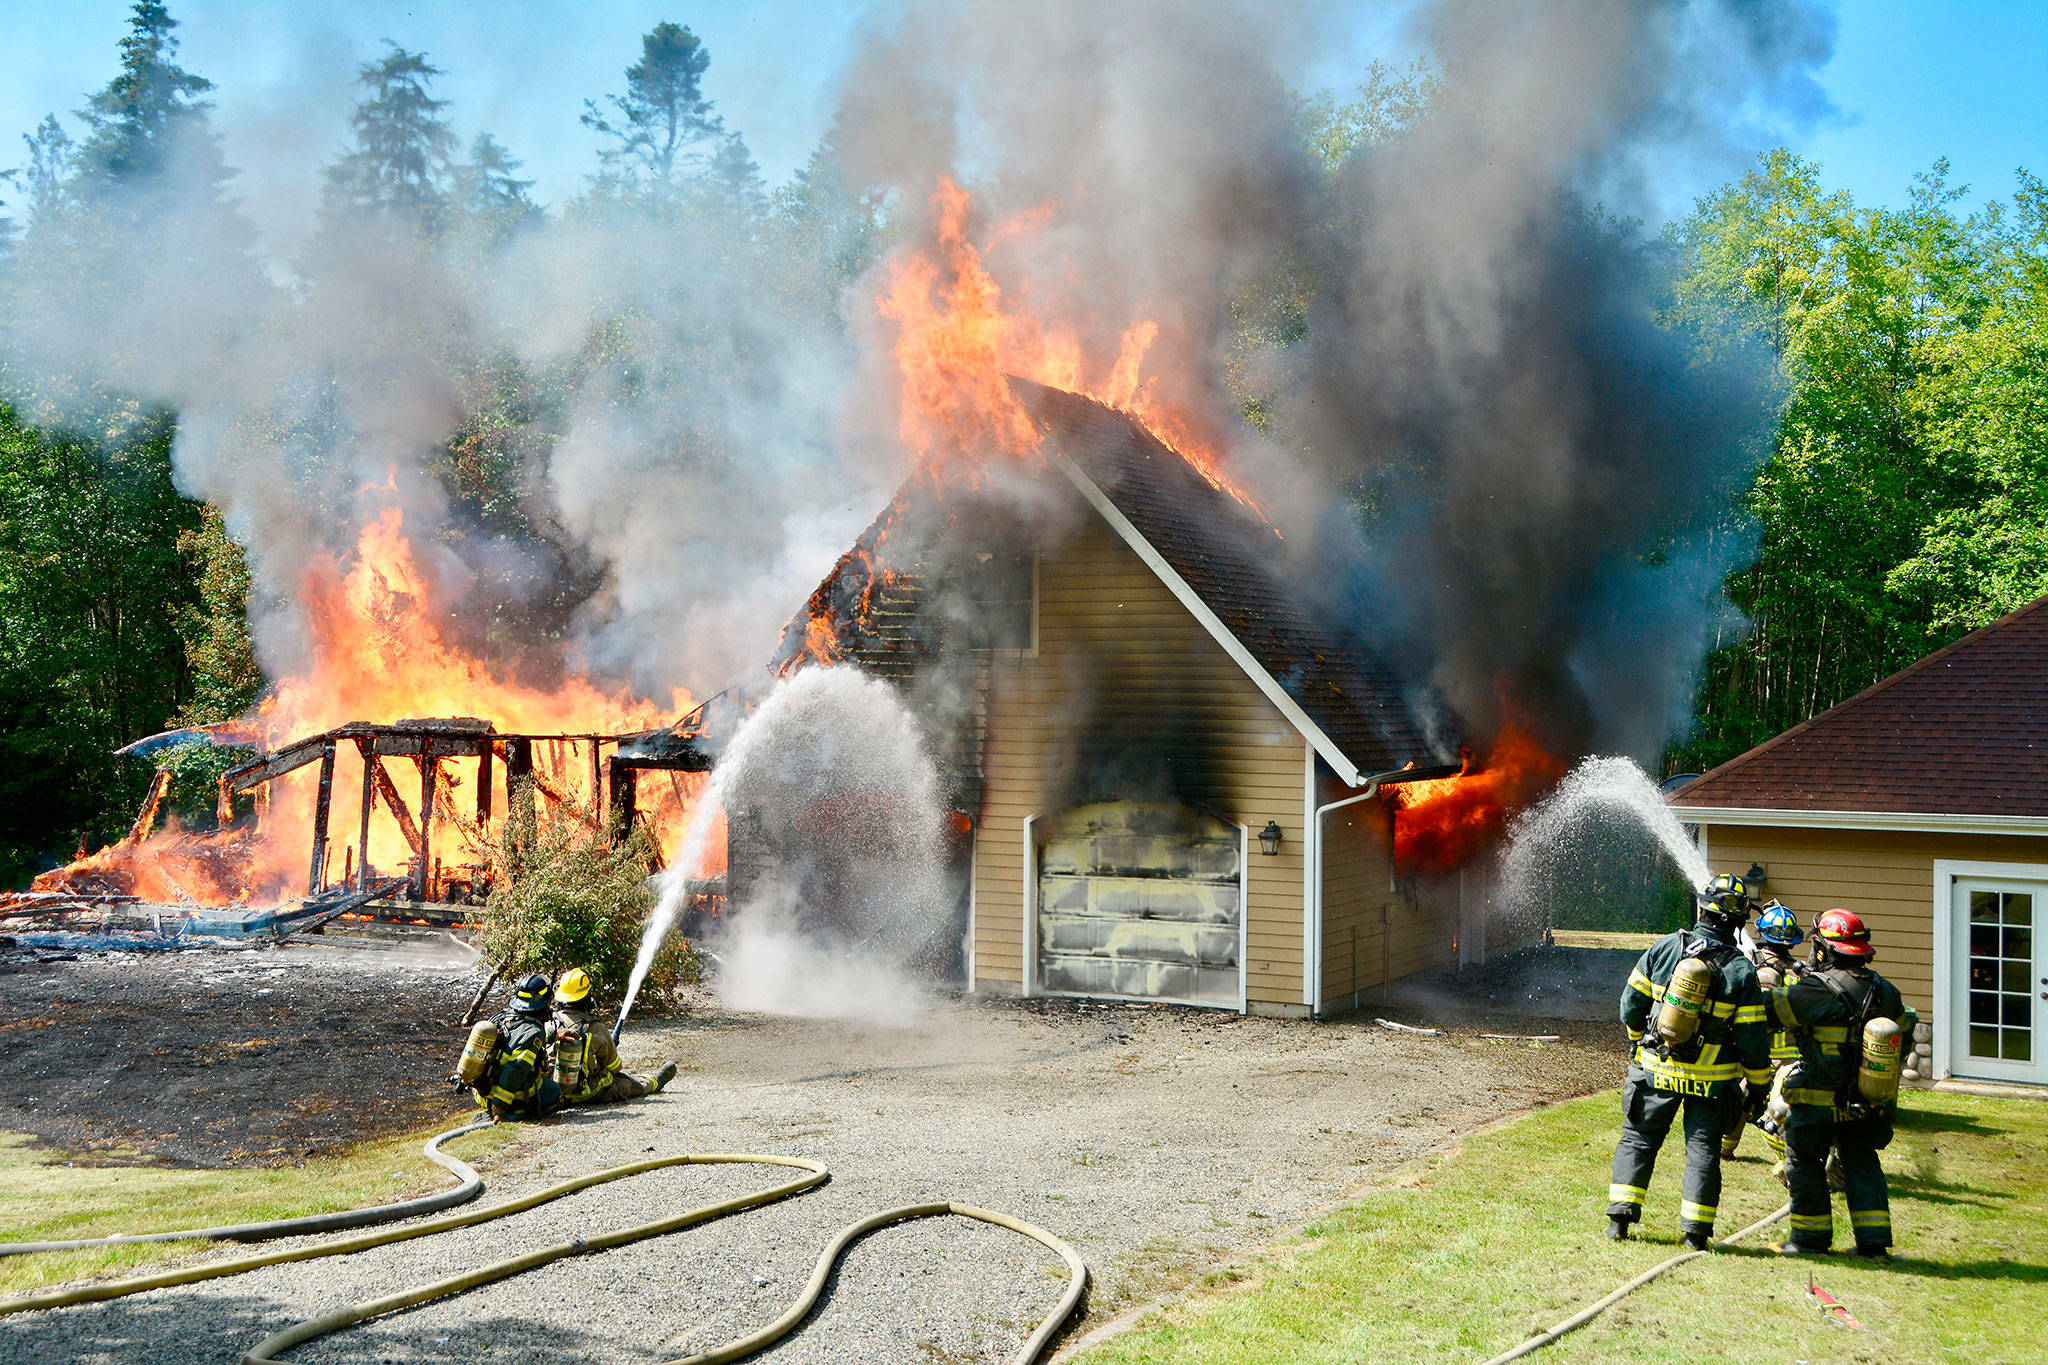 Fire crews from District 2 (Port Angeles and 3 (Sequim) respond to a fully involved, two-story structure fire near the end of Lake Farm Road on June 19. All of the occupants had evacuated the house at 131 Pristine Lane, Clallam County Fire District No. 3 Chief Ben Andrews said. Photo by Jay Cline/Clallam Fire District No. 2